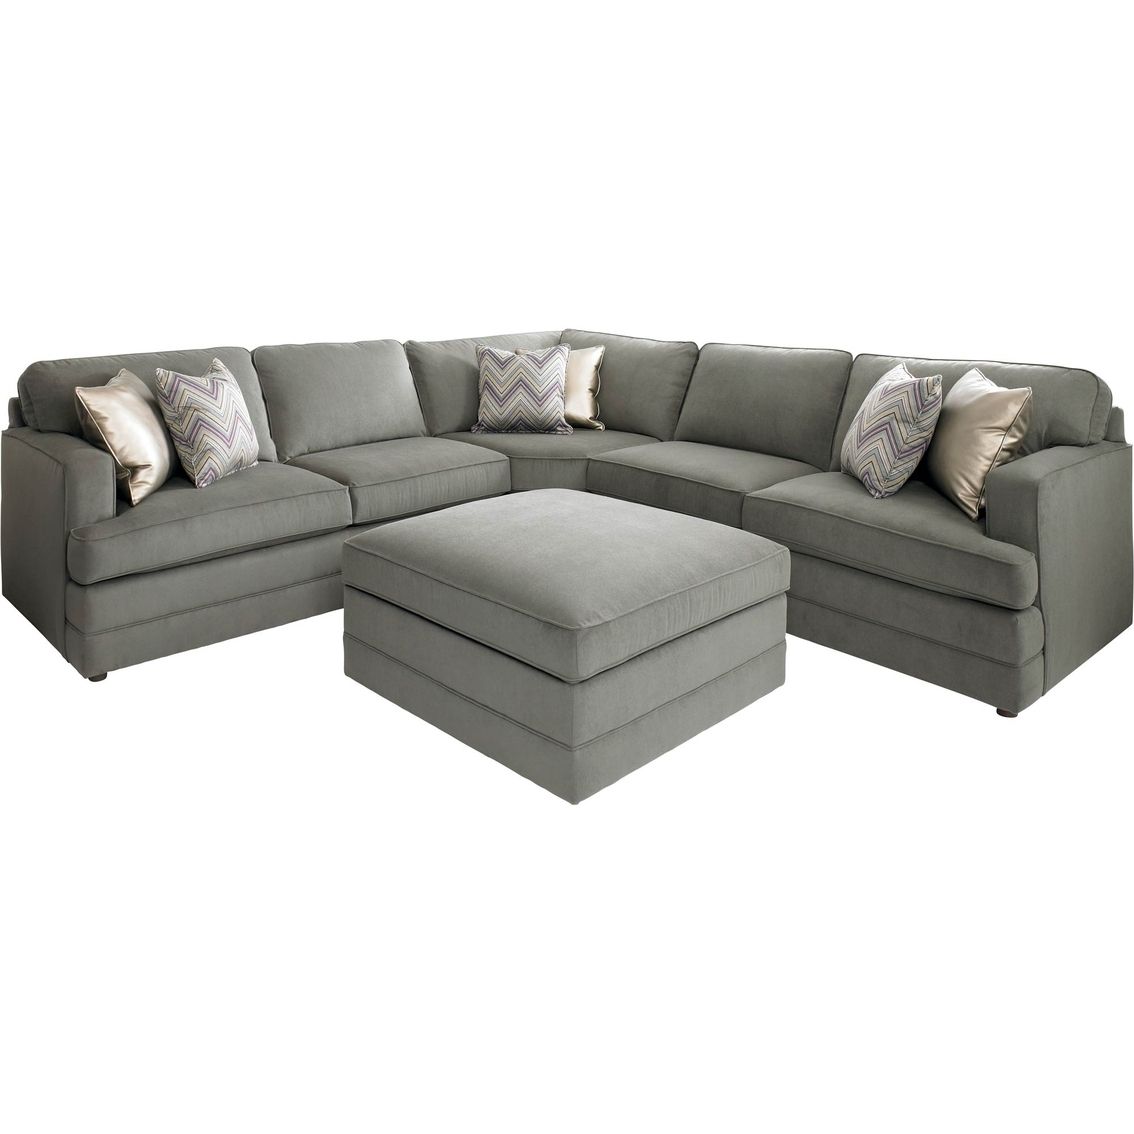 Bassett Dalton L Shaped Sectional Sofa With Ottoman | Making Our With Regard To Sectional Sofas At Bassett (Photo 7 of 15)